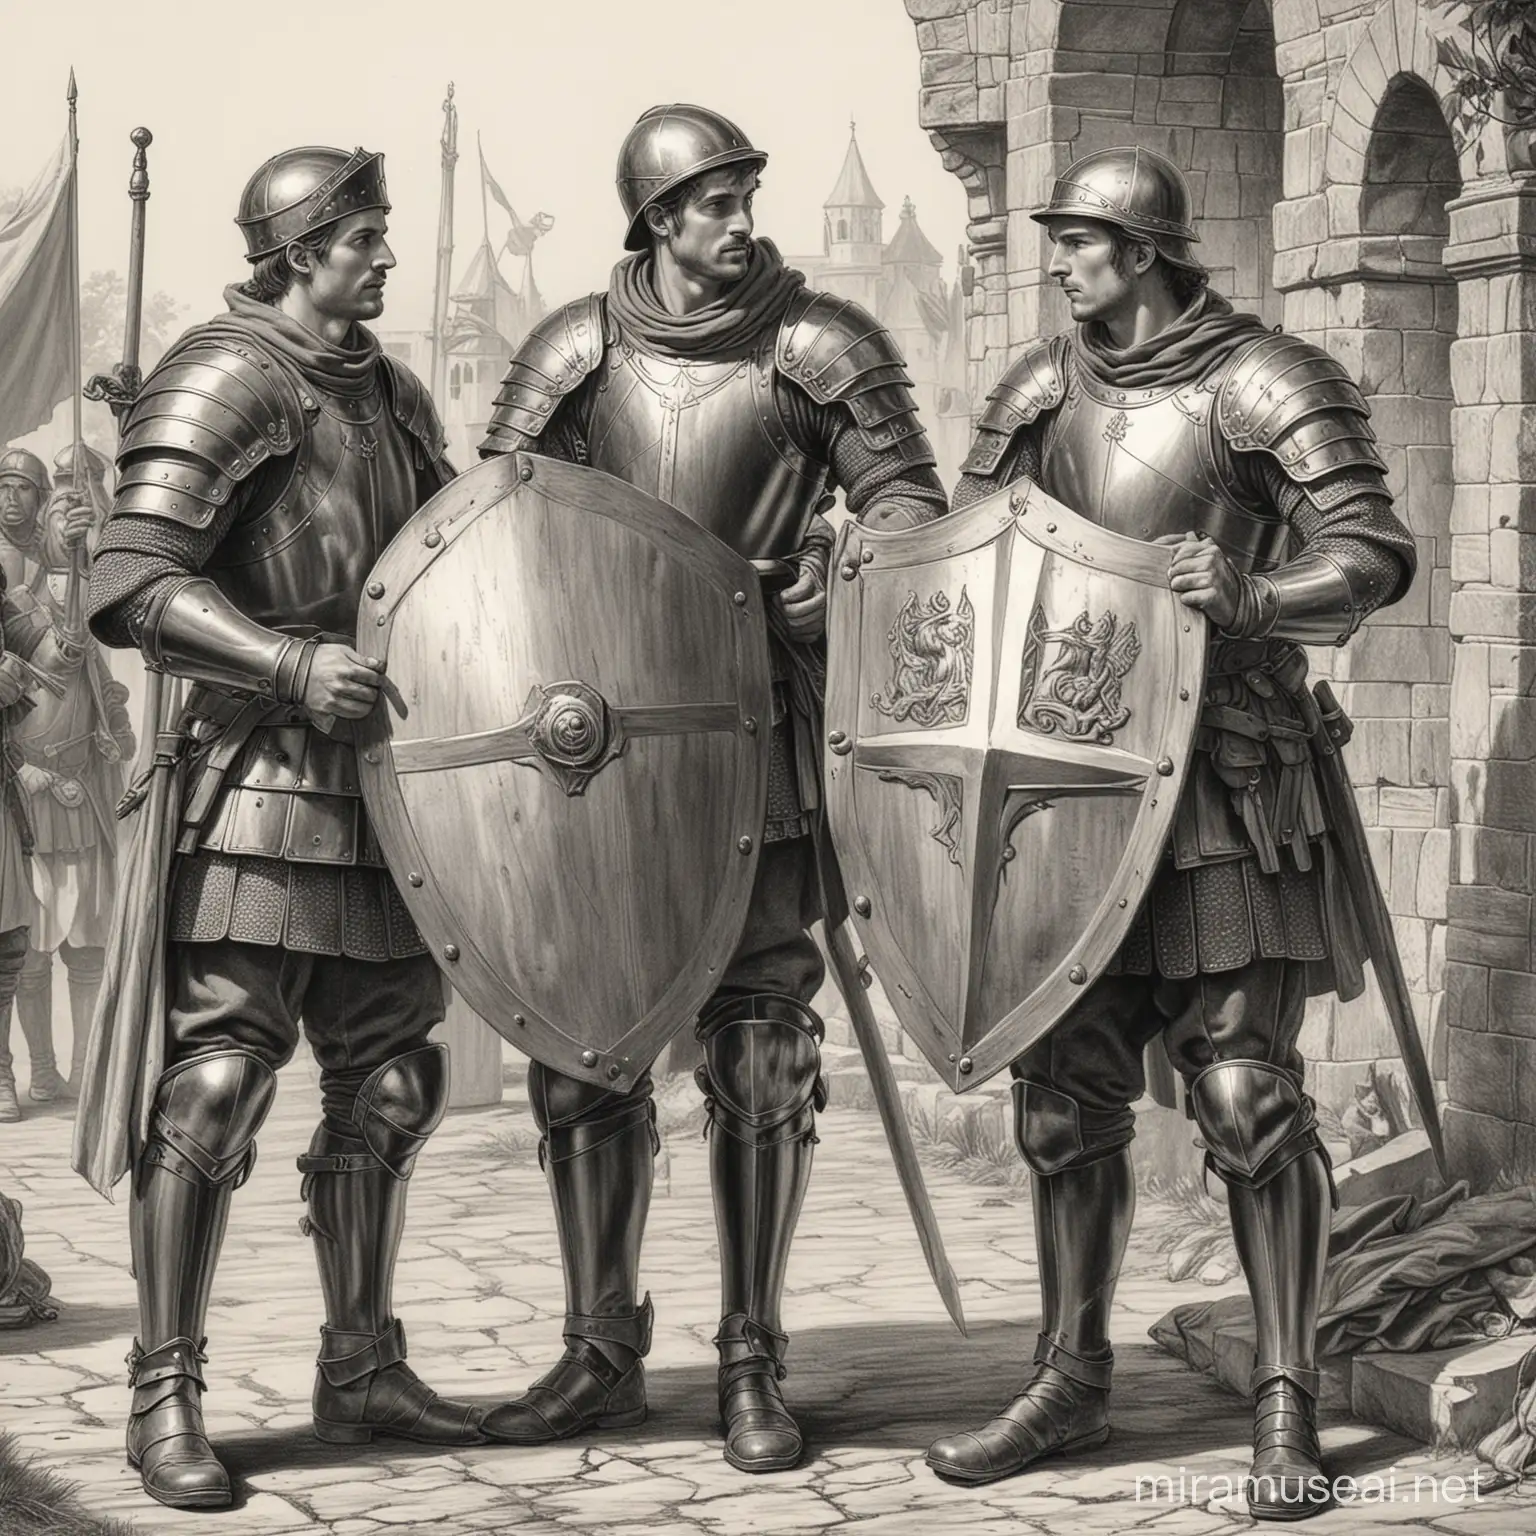 Medieval Soldiers Preparing for Battle Armor and Shield Maintenance